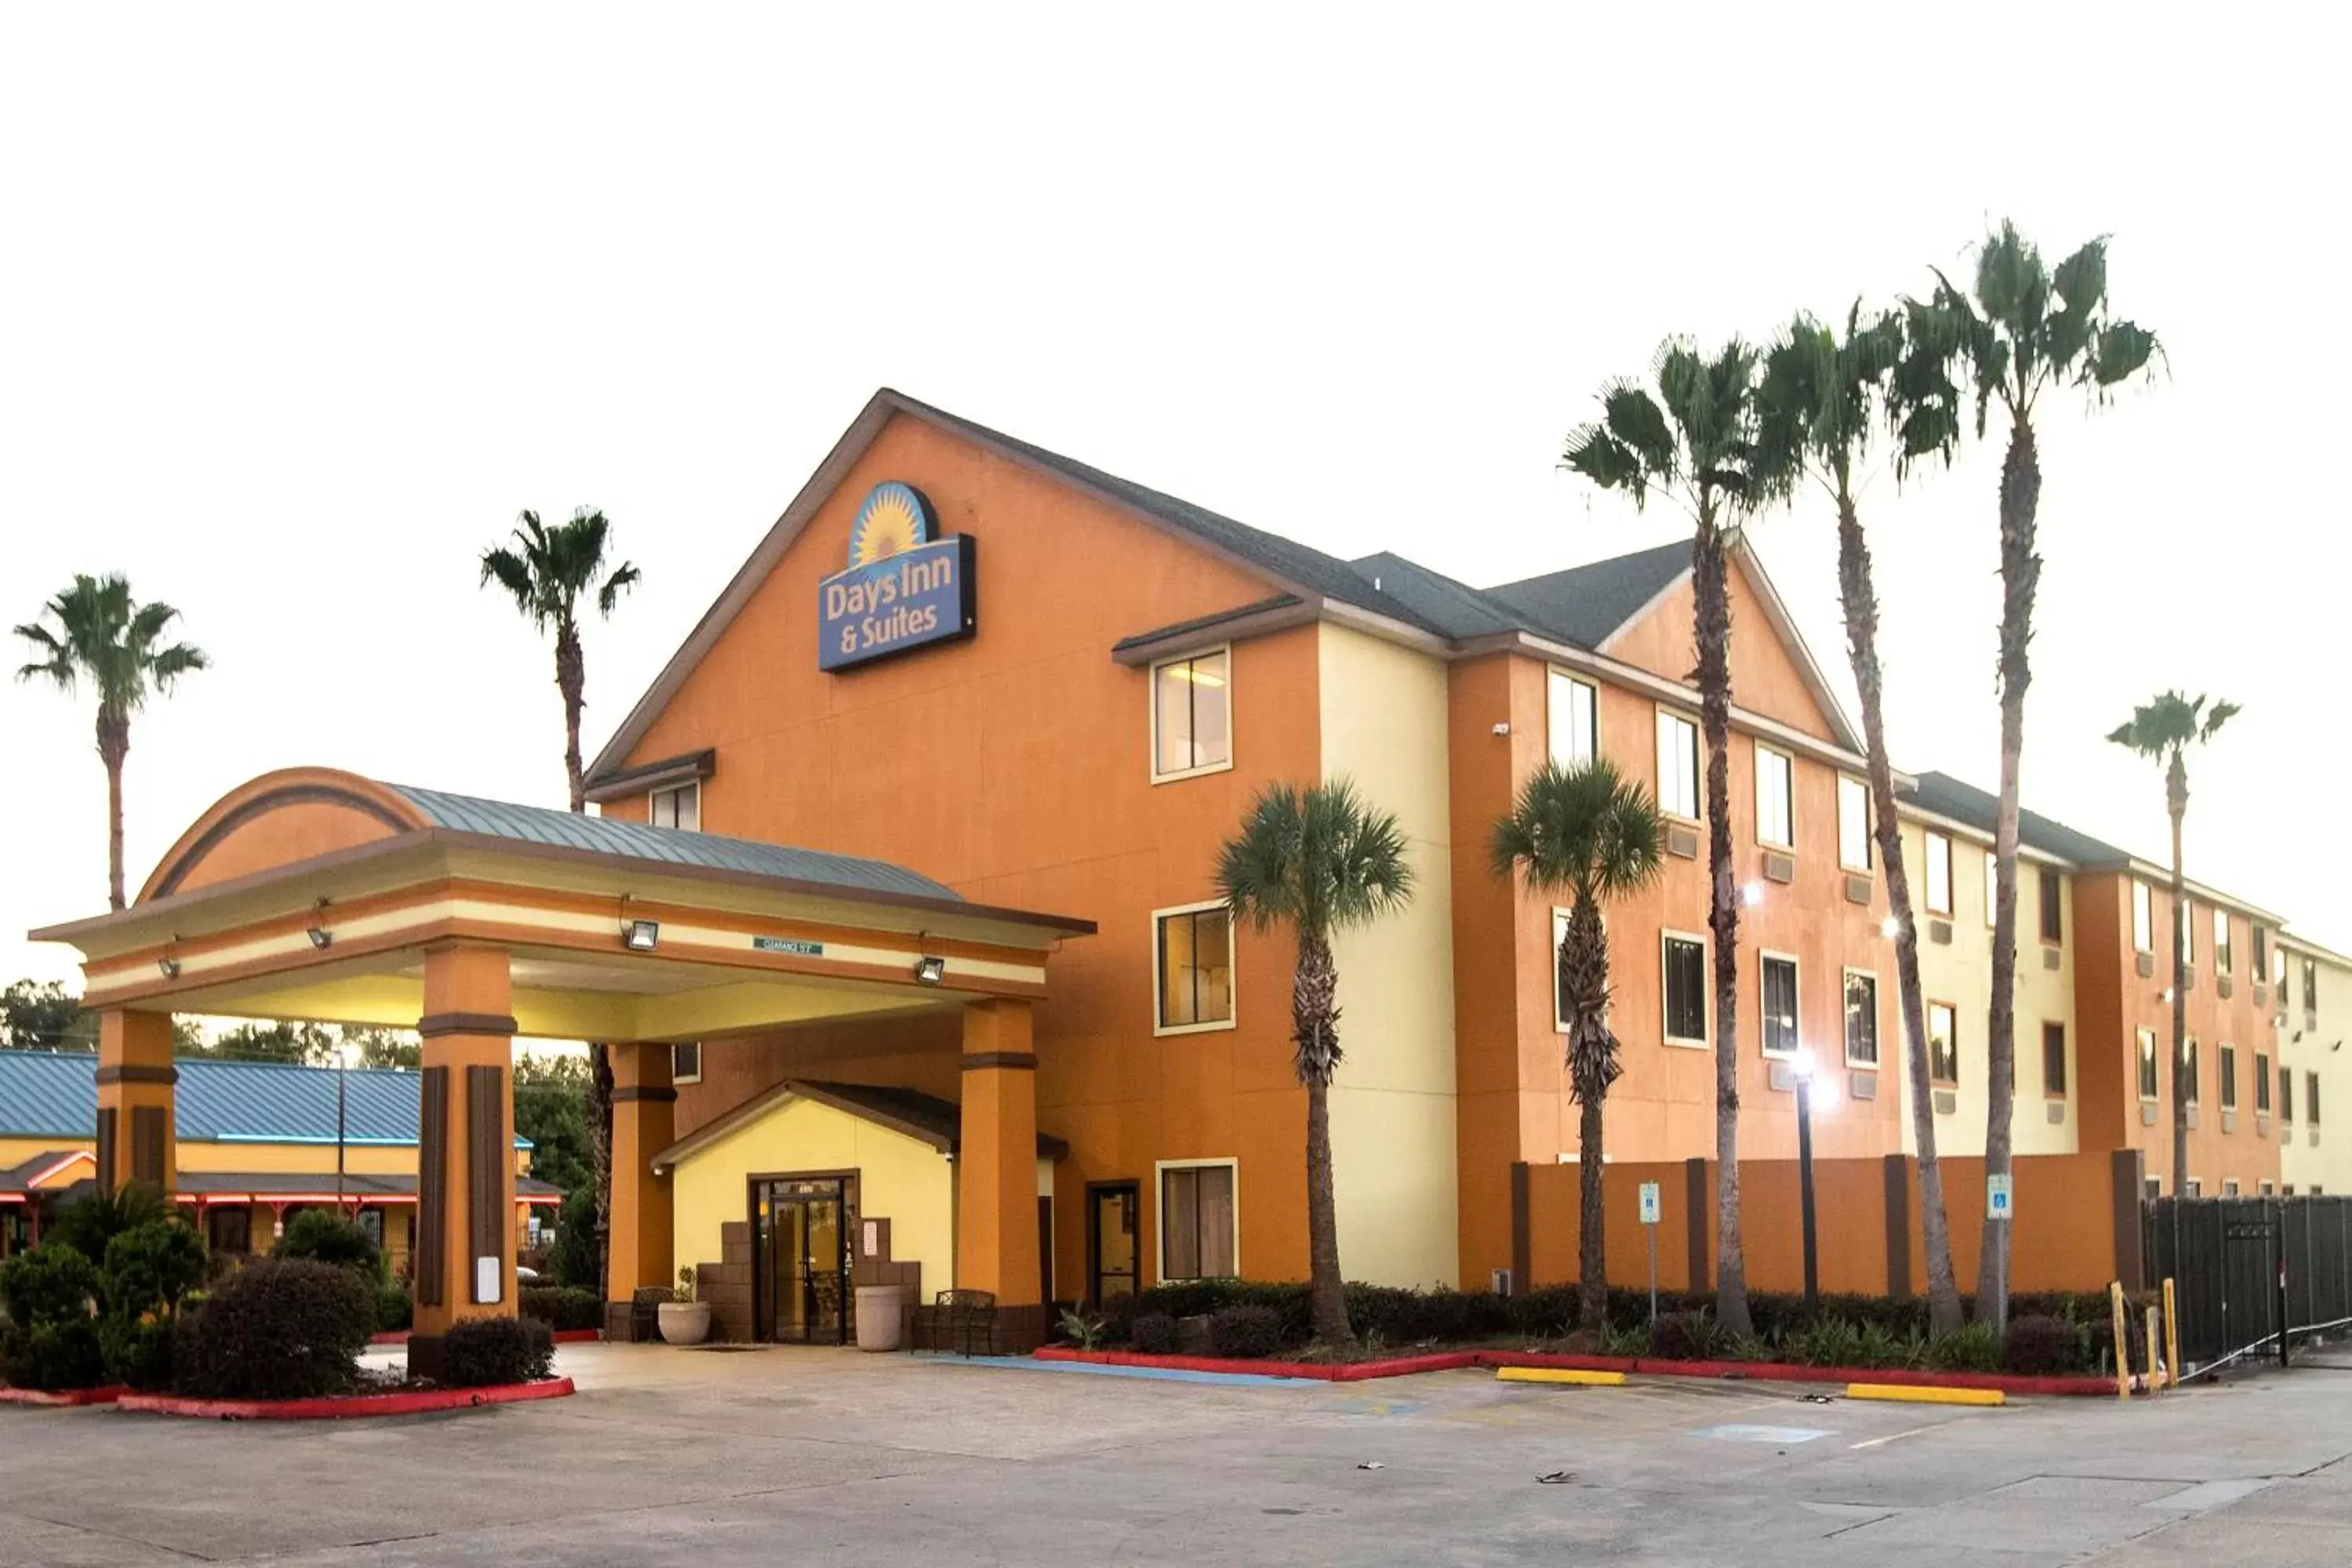 Facade/entrance, Property Building in Days Inn & Suites by Wyndham Houston North/Aldine